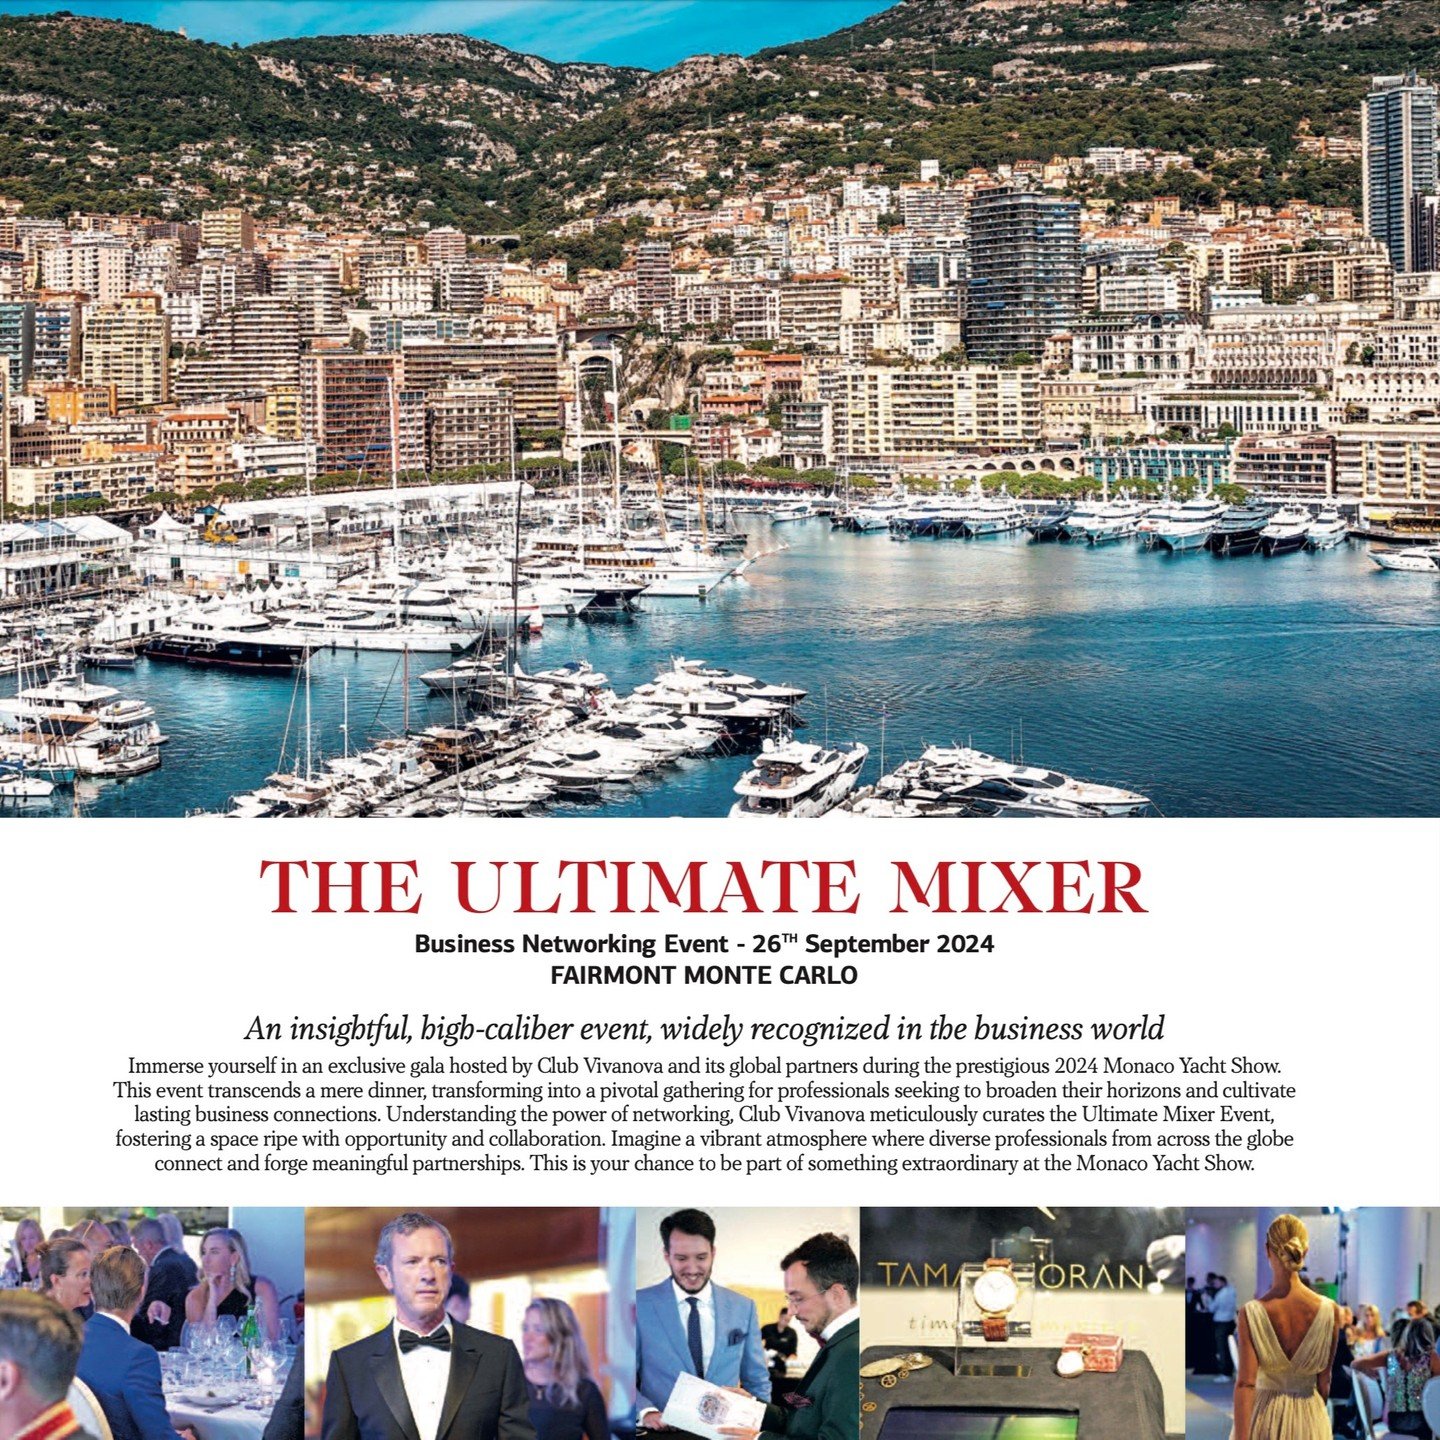 🇲🇨 The Ultimate Mixer is on again - Thursday 26th September 2024 at the Fairmont Monte Carlo!

Ticketing and exclusive partnerships now open at www.theultimatemixer.com or see bio @clubvivanova

During the 2024 Monaco Yacht Show, Club Vivanova and 